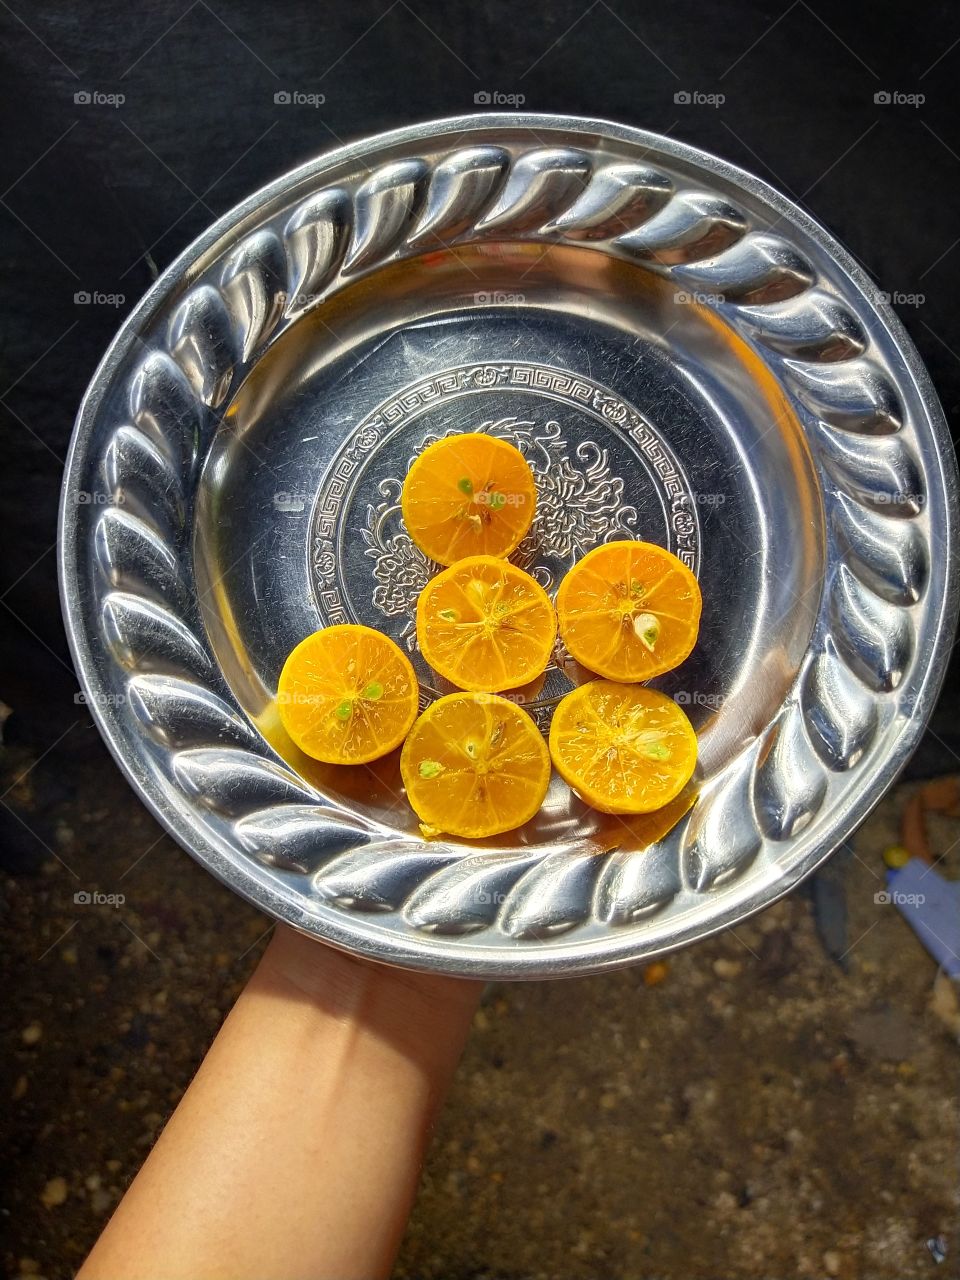 six slices of yellow lemons in a gray plate